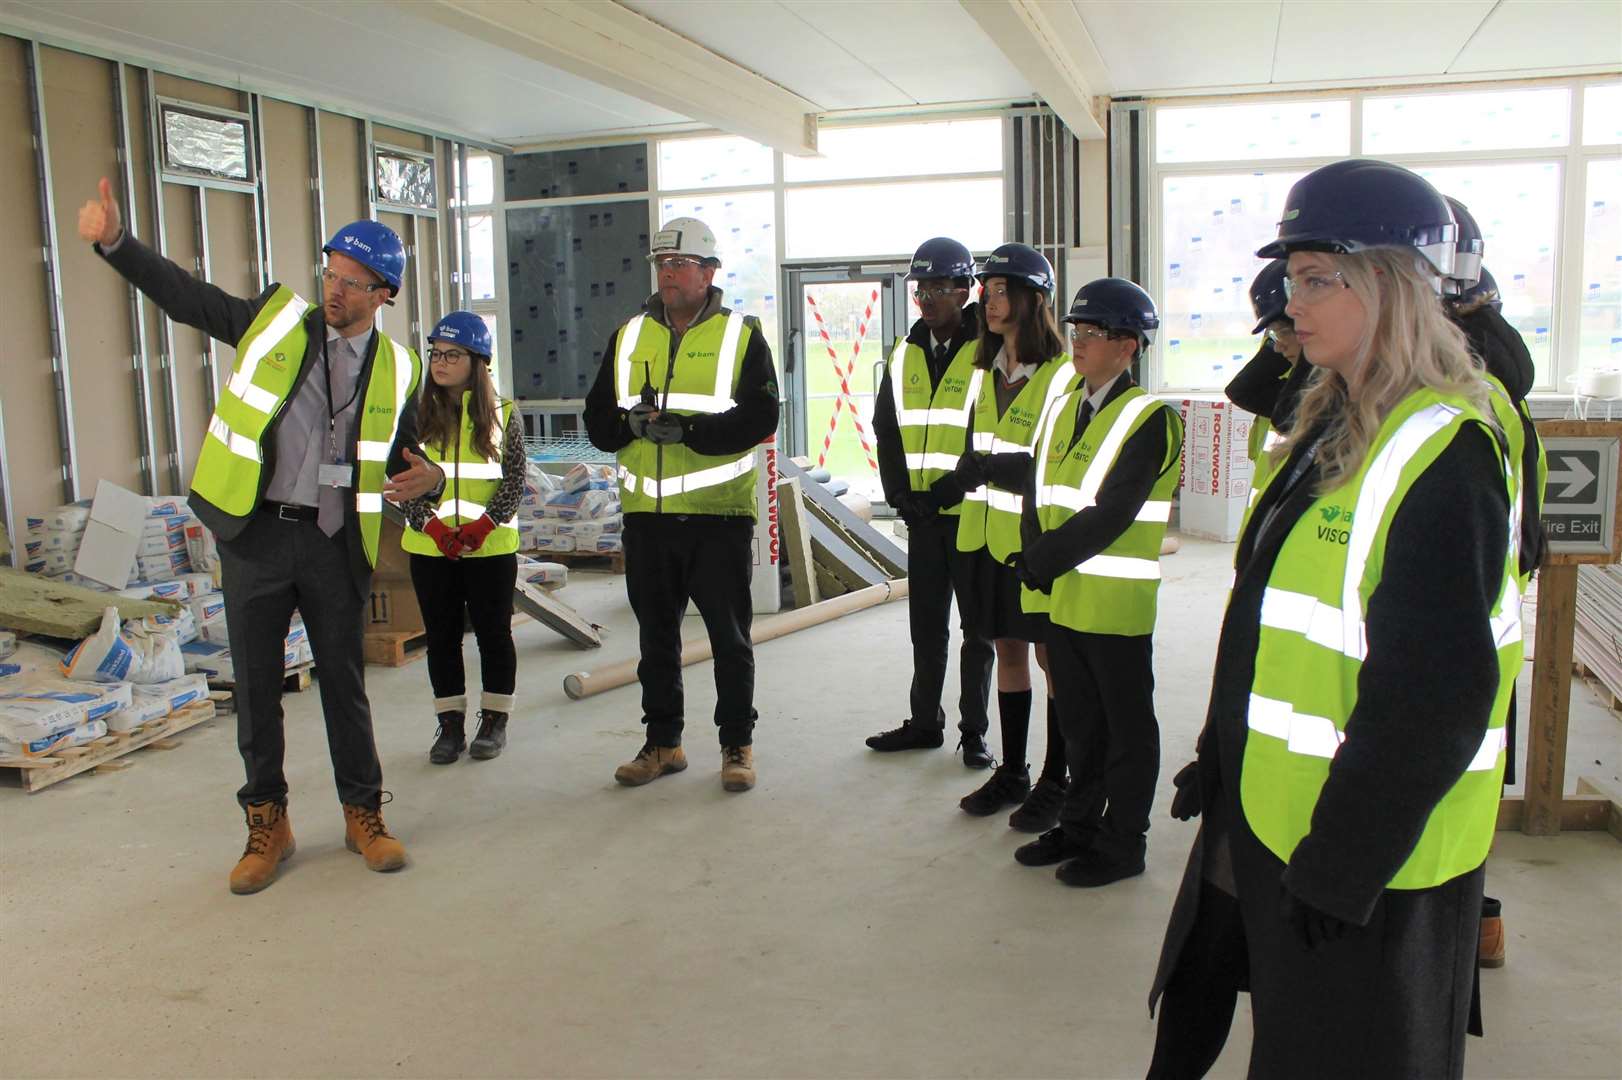 The students and teacher are set to move into the new building after the Easter holidays. Photo: Endeavour MAT Trust